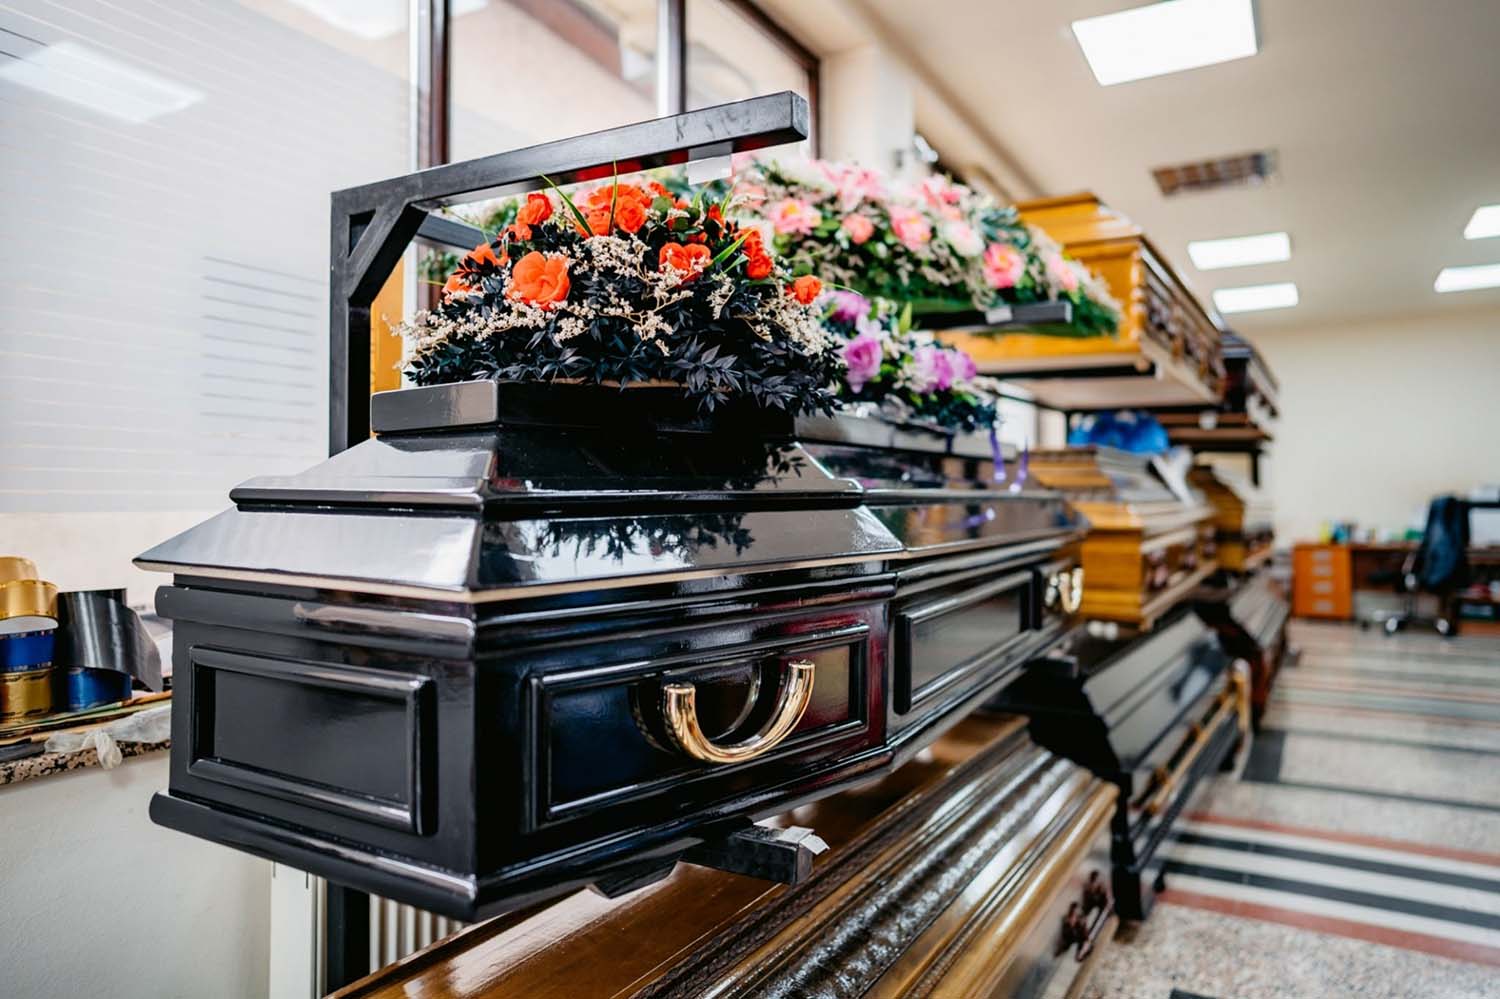 Where to Buy Wooden Coffins Direct at Better Price - Trusted Caskets is the Top US Casket Supplier